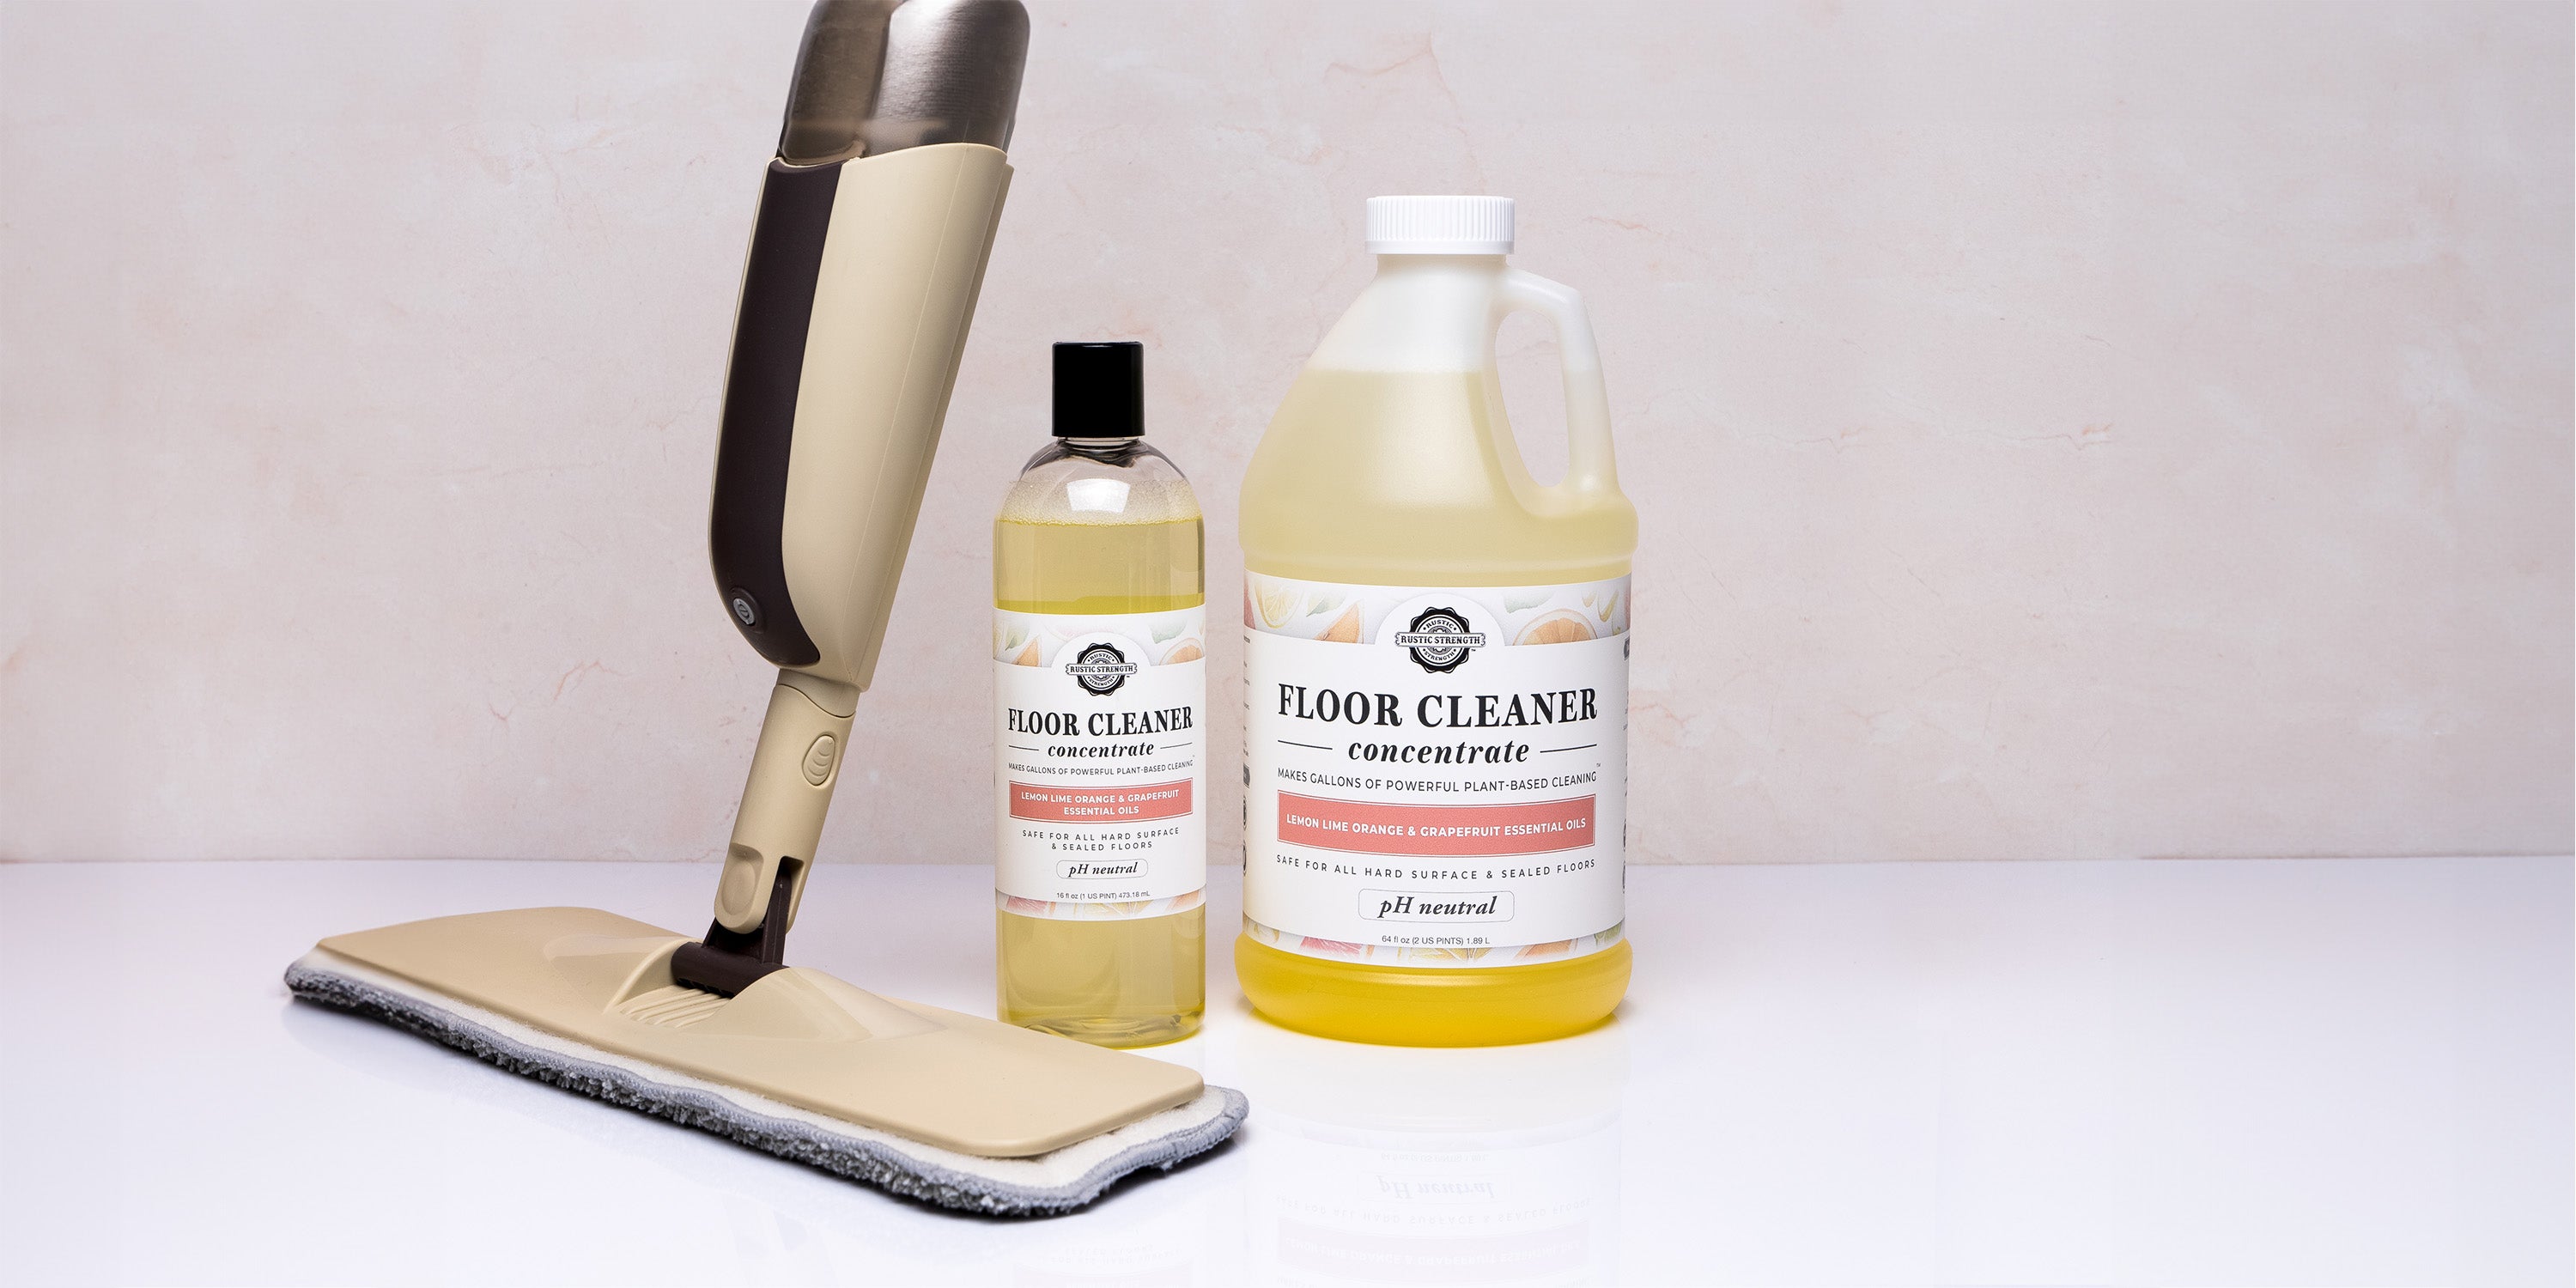 Rustic Strength  pure, clean and refillable products for everyday use